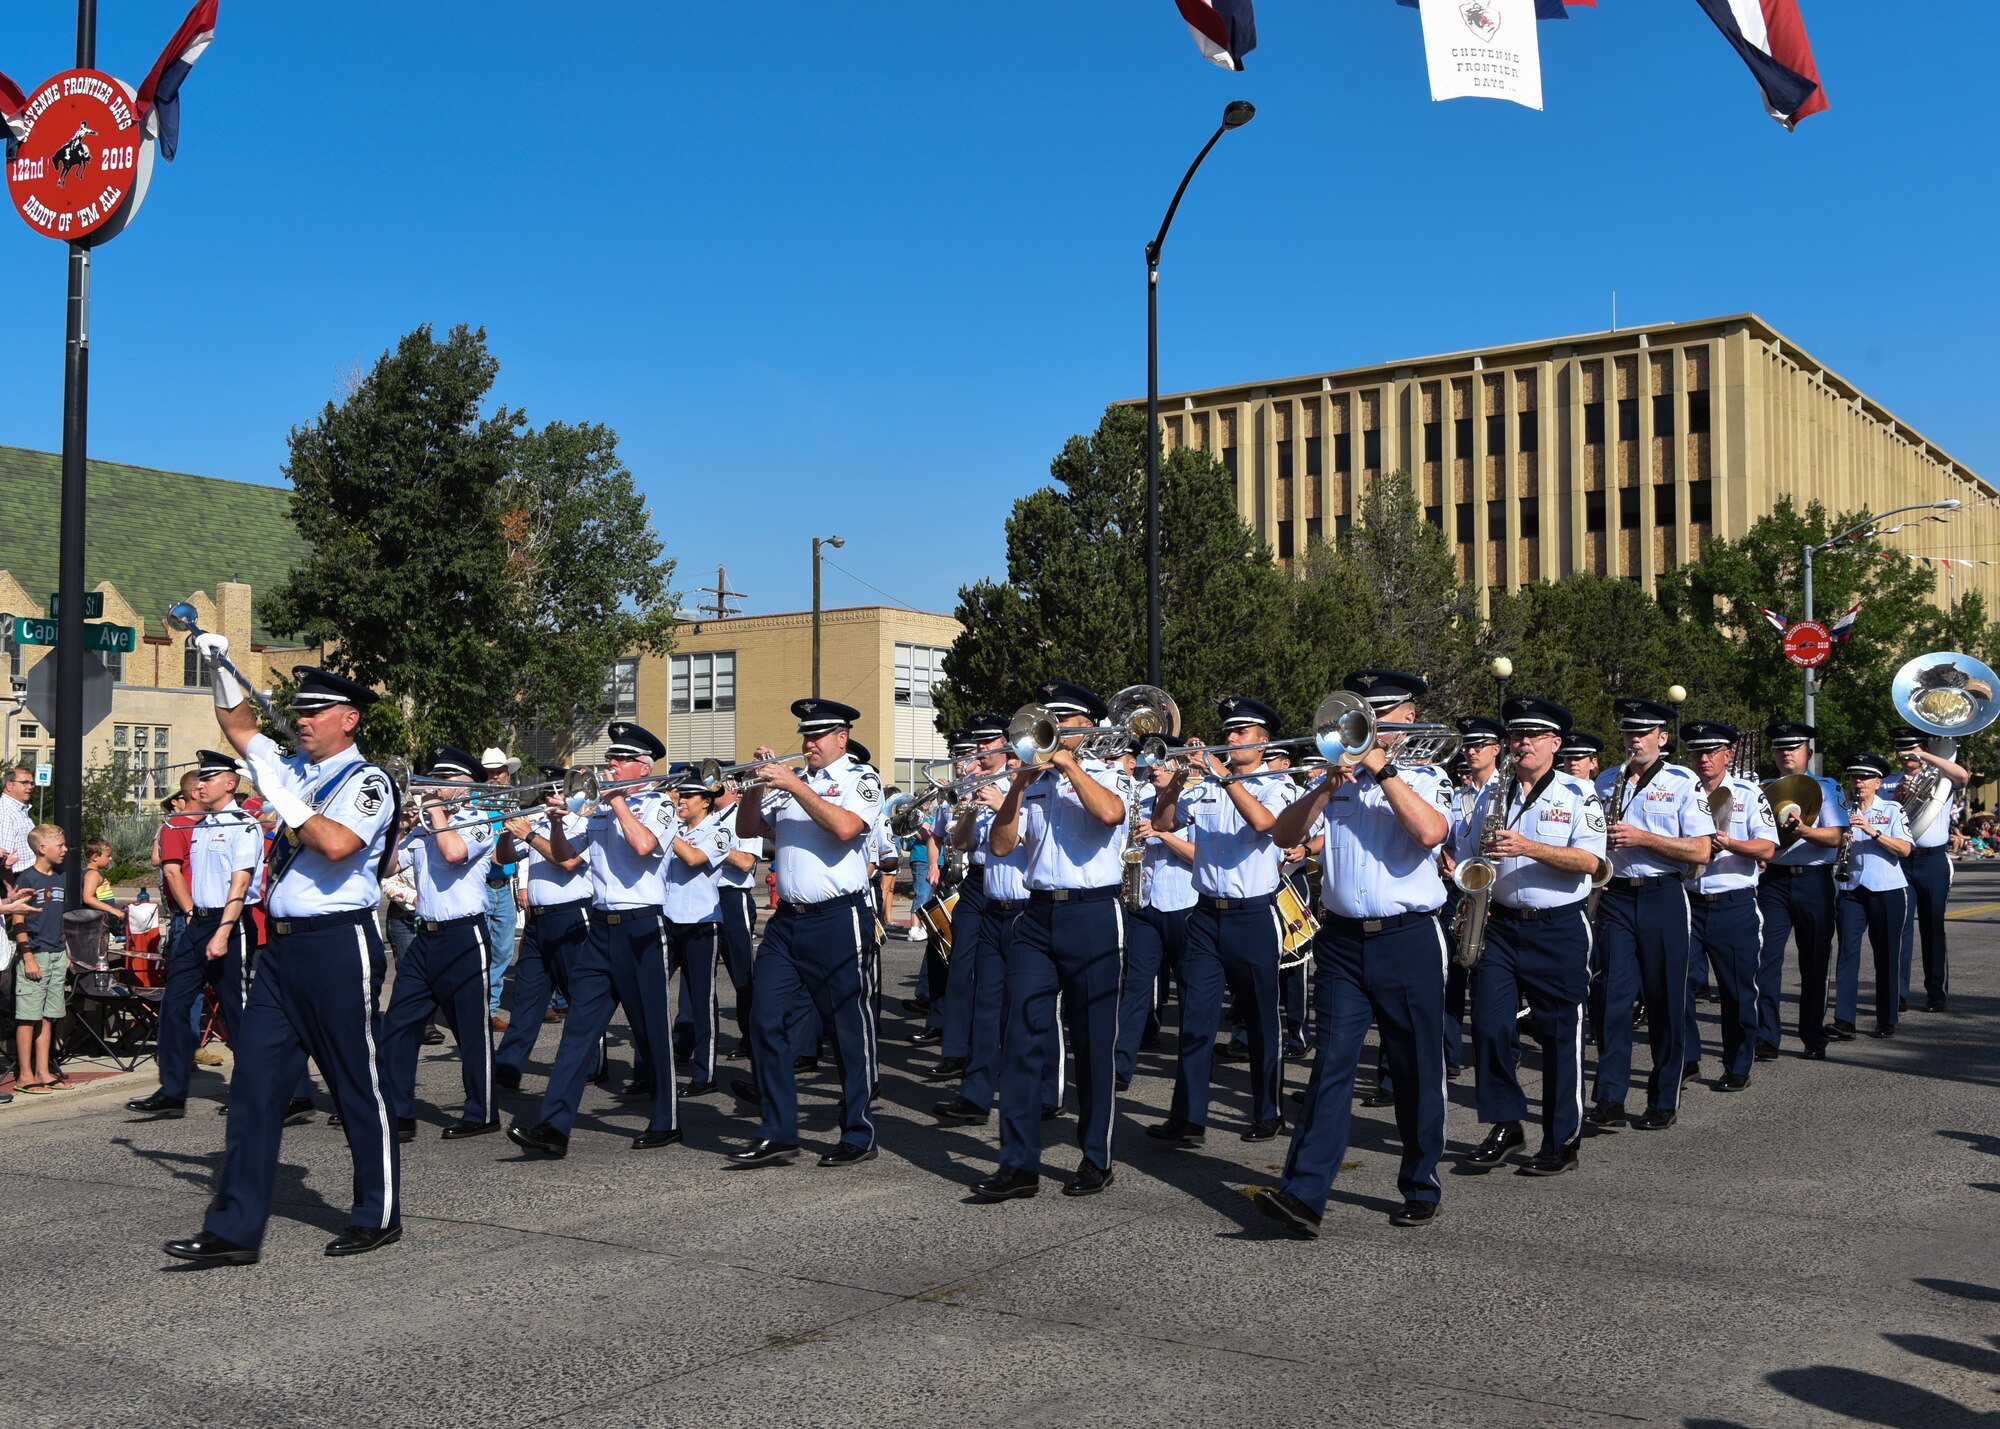 Members of the U.S. Air Force Academy Band play music as they march down the streets of Cheyenne, Wyo., during the 122nd Cheyenne Frontier Days opening Grand Parade, July 21, 2018. Airmen play many roles in making CFD, the biggest event in Cheyenne, a success. The two communities came together to celebrate during the 122nd CFD rodeo and festival. (U.S. Air Force photo by Airman 1st Class Abbigayle Wagner)